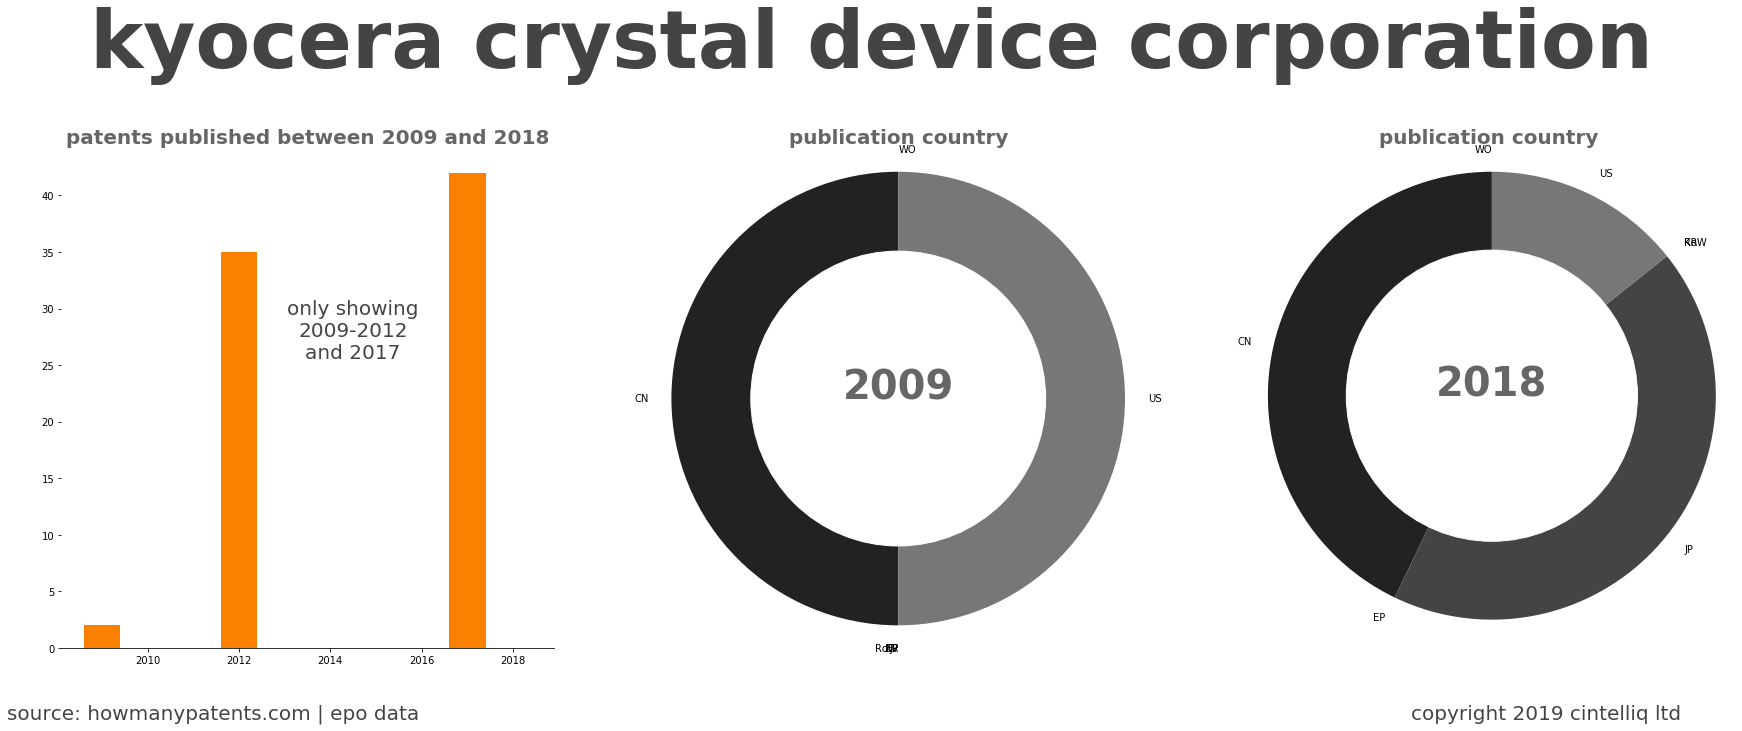 summary of patents for Kyocera Crystal Device Corporation